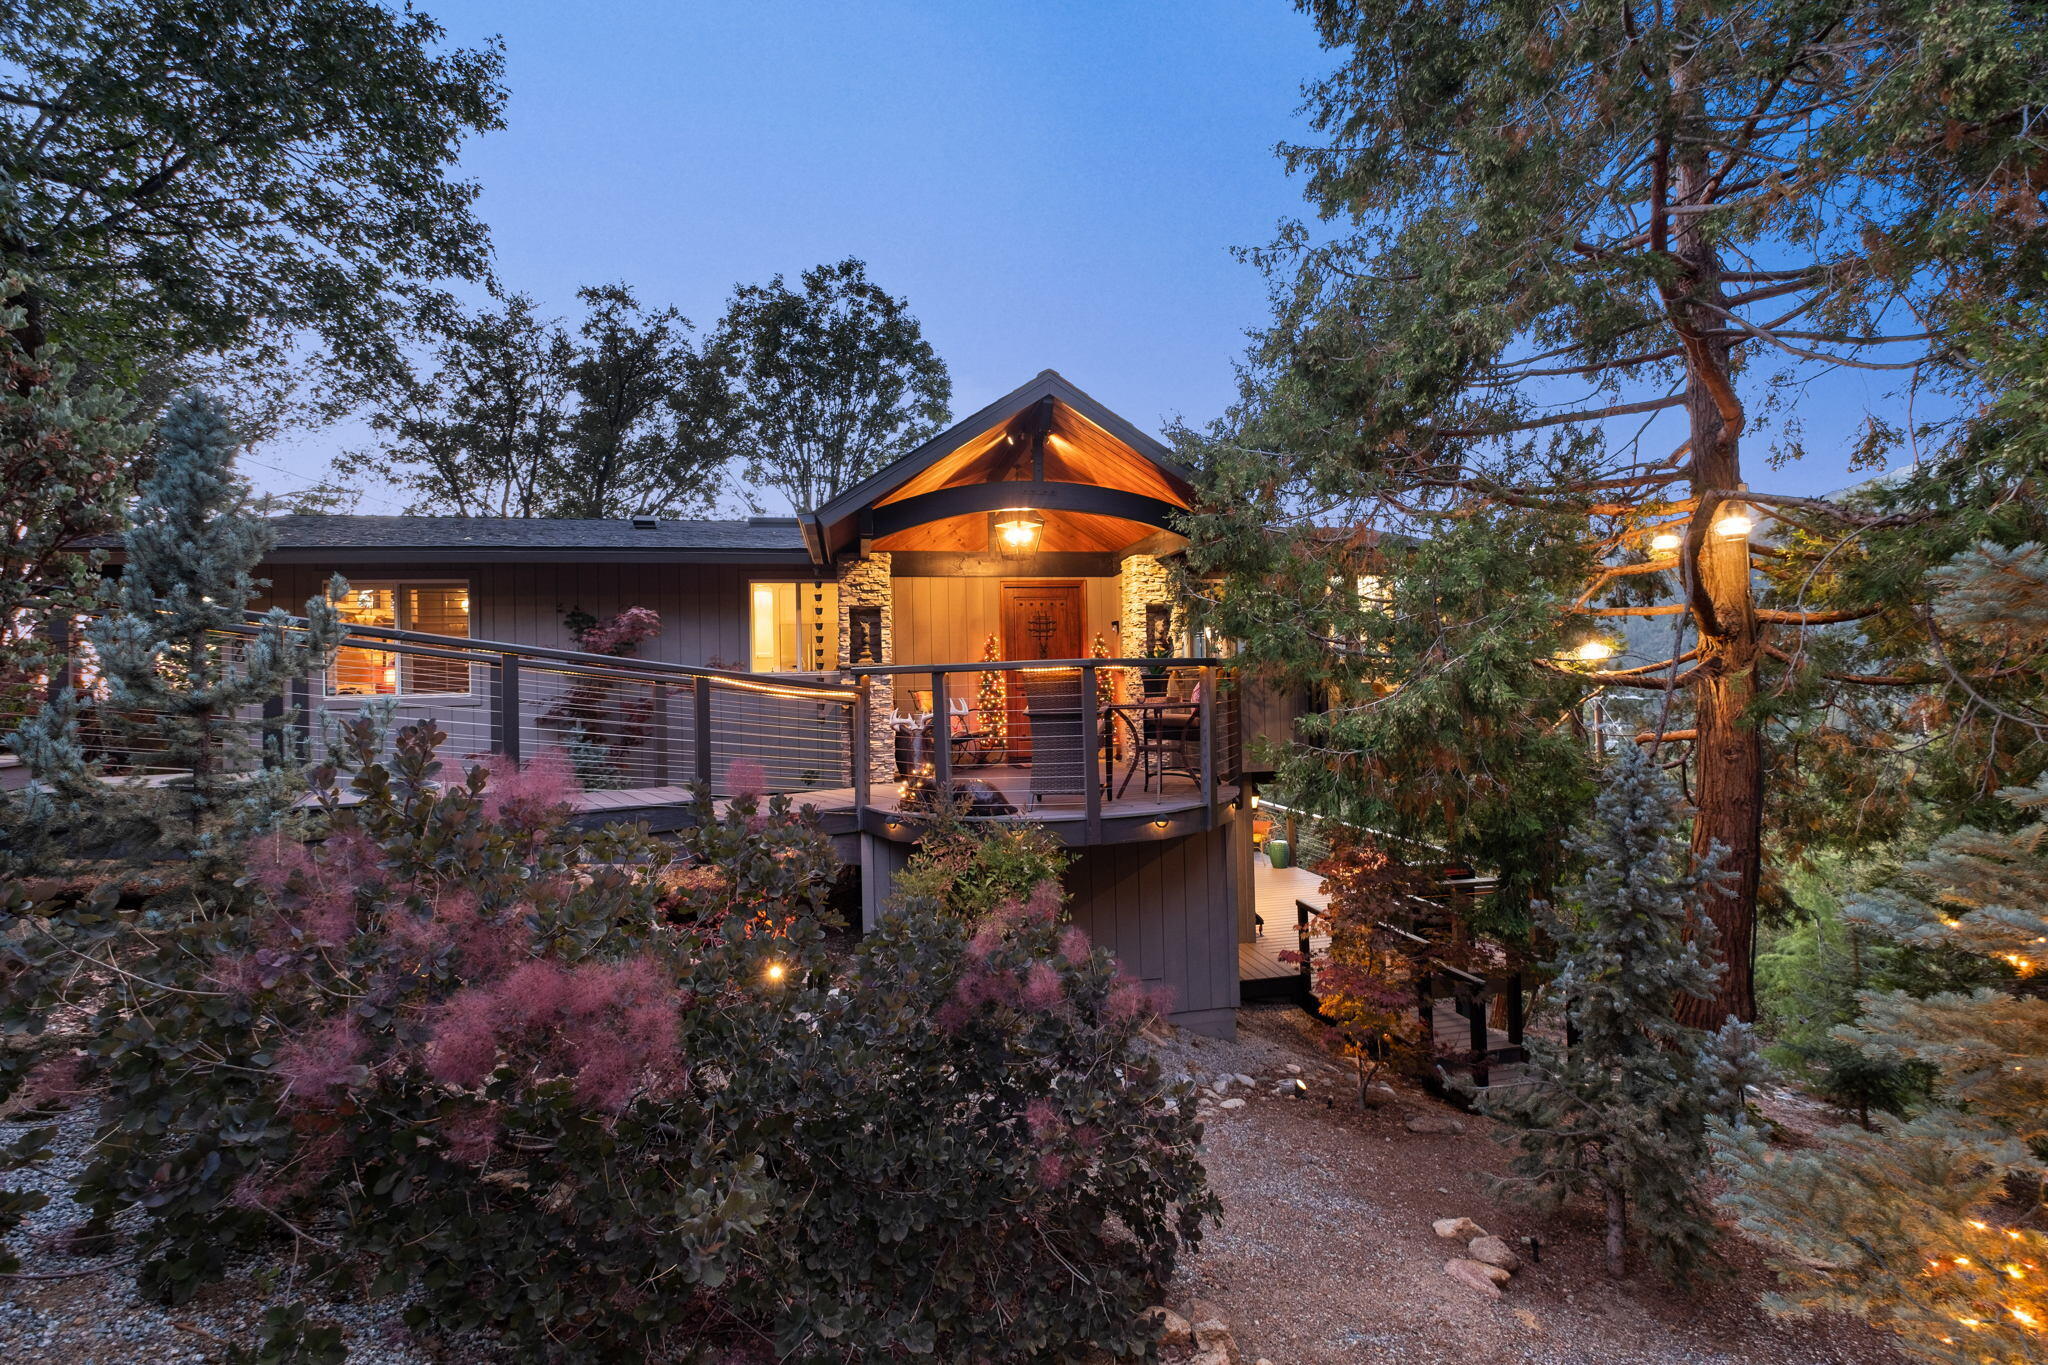 Fully remodeled and upgraded, this stunning Mid-Century Modern masterpiece retains its 1962 heritage while seamlessly incorporating today's preferred amenities. Built into the mountainside on a quiet cul-de-sac in Idyllwild, the home is poised to enjoy 180-degree views that span lush forests, Lily Rock and majestic mountains that soar as high as 10,000 feet. Surrounded by natural boulders, Japanese maples and blue spruce trees, the two-level showplace is embraced by 5 decks that encompass about 1,383 s.f. of outdoor living space and is protected by owner-owned vacant lot. Vaulted and beamed knotty pine ceilings and floor-to-ceiling windows emphasize the home's coveted Mid-Century style, while high-end wood-style laminate flooring, custom lighting fixtures, custom millwork, plantation shutters and lighted art niches are showcased. Approx. 1,762 s.f., the 3-bedroom, 2 full baths and powder room residence features a great room, office or fourth bedroom, solarium nook, a lower-level ensuite with deck, and a chef-caliber kitchen. Select furnishings available.  House only,  $1,095,000.  Separately, an .18 acre adjacent street front view lot is being offered for $85,000 to protect home's view and privacy.